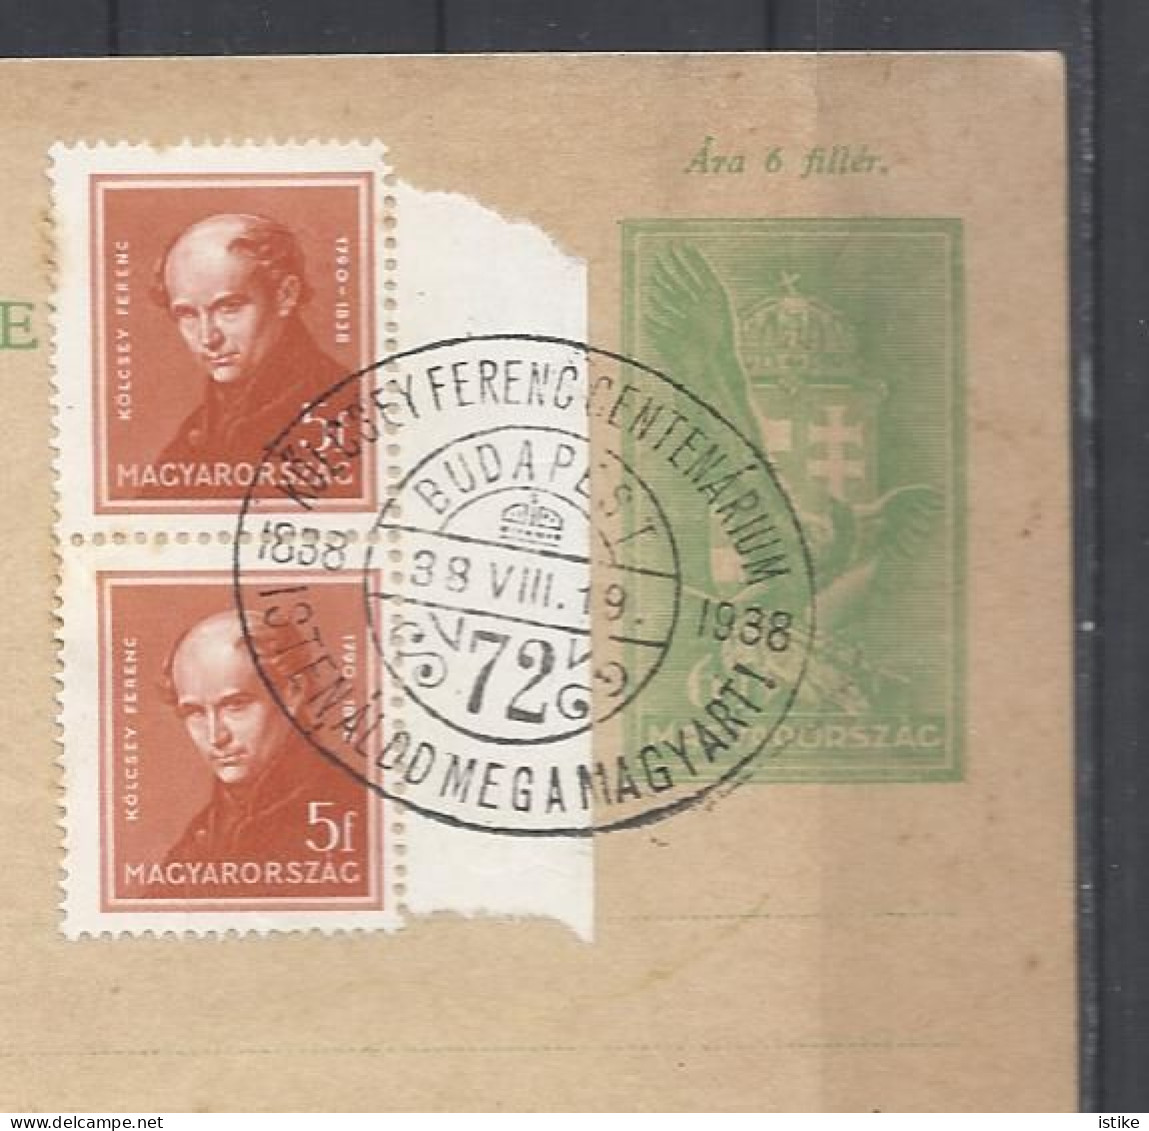 Hungary, St Card, Commemorative Cancellation Kölcsey Ferenc Centenary Of Birth, 1938. - Entiers Postaux